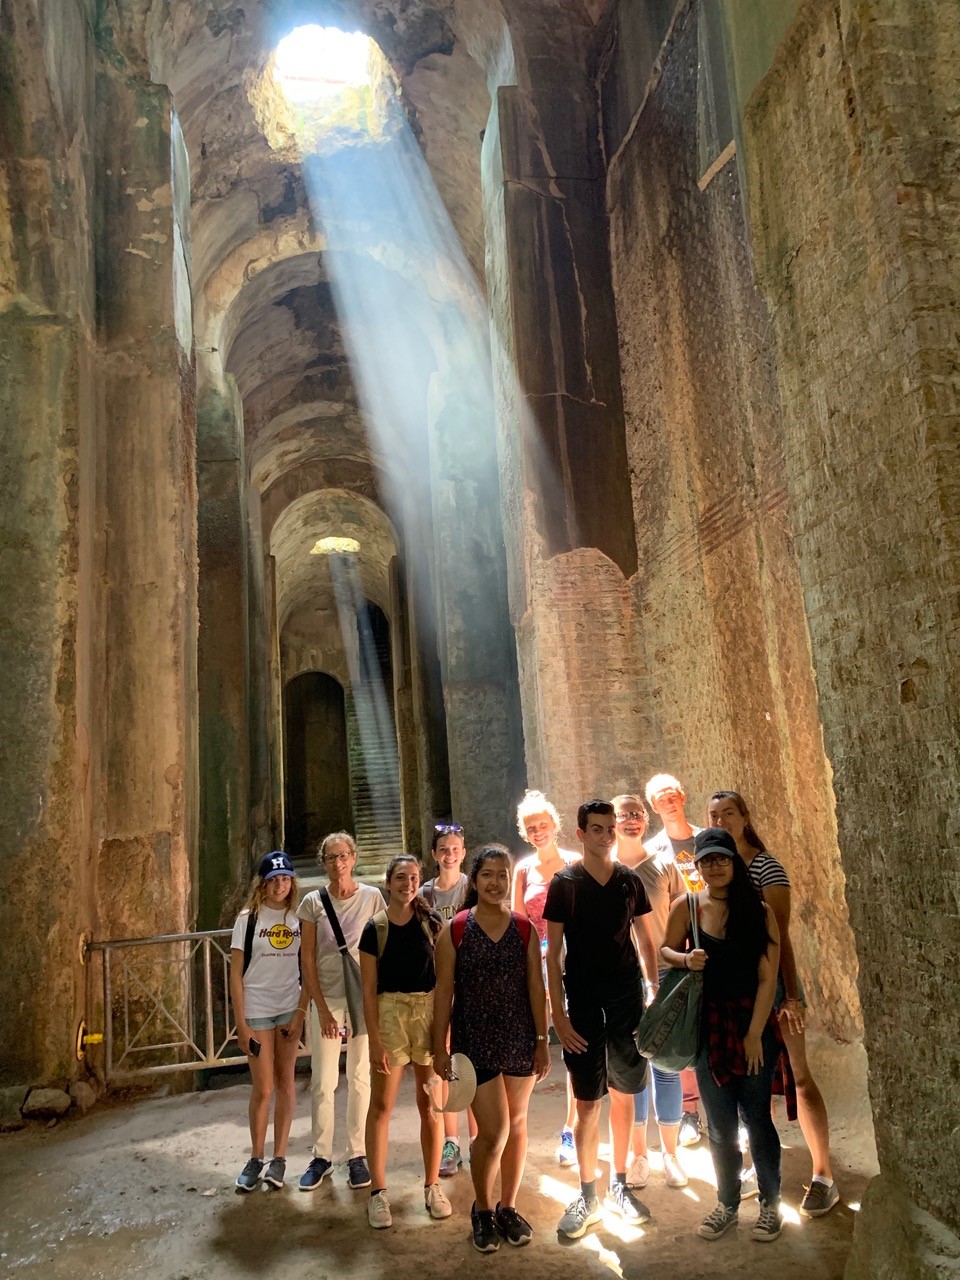 A group of students touring a building.